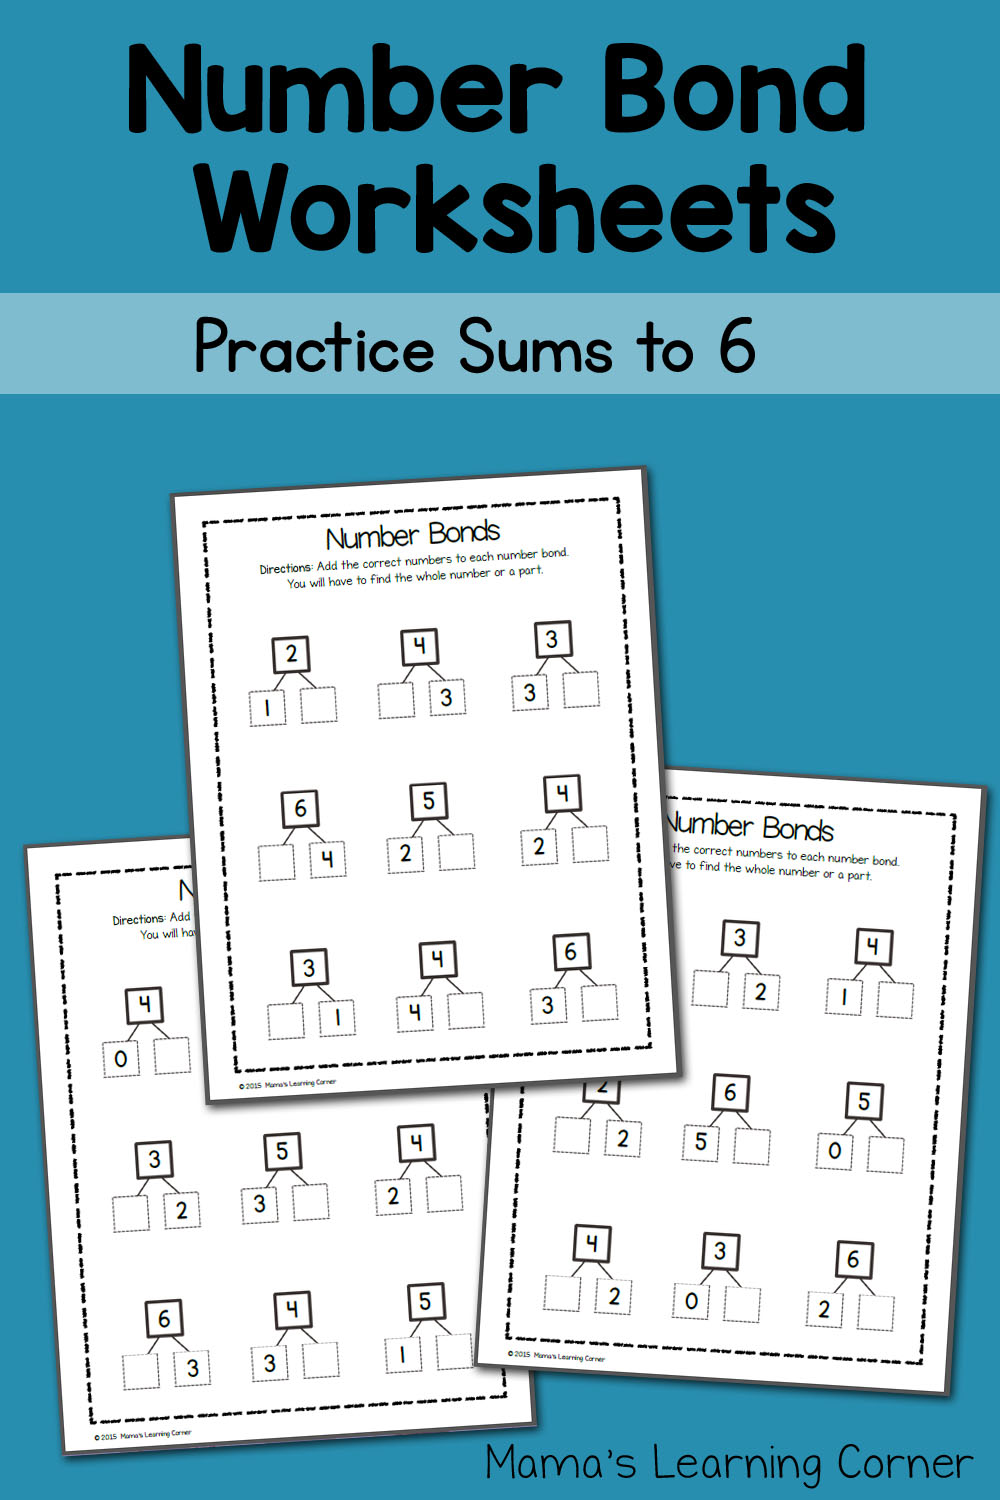 number-bond-worksheets-sums-to-6-mamas-learning-corner